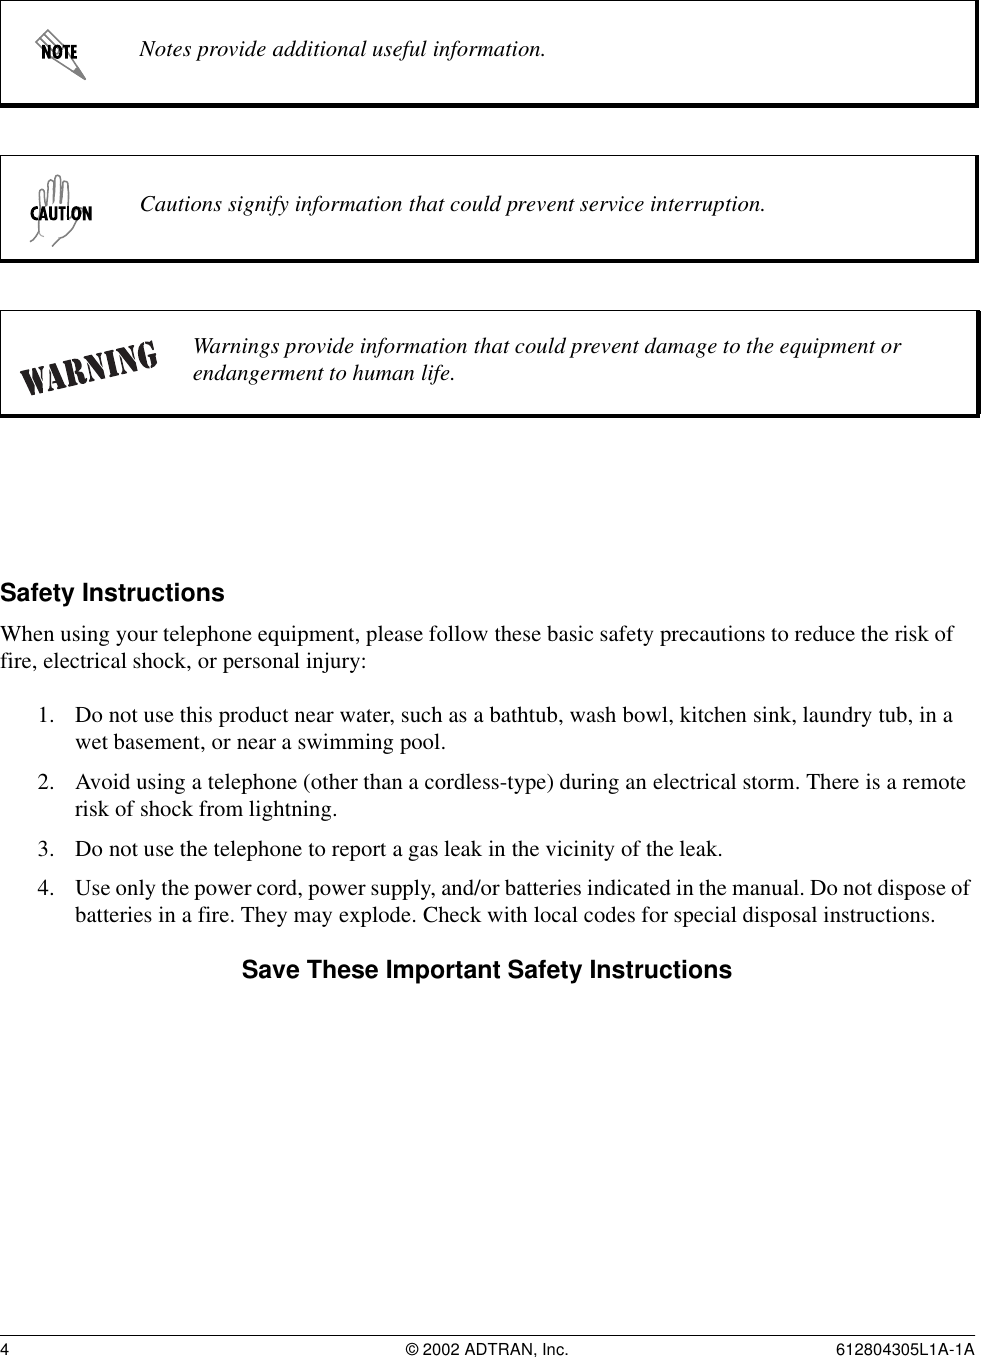 4 © 2002 ADTRAN, Inc. 612804305L1A-1ASafety InstructionsWhen using your telephone equipment, please follow these basic safety precautions to reduce the risk of fire, electrical shock, or personal injury:1. Do not use this product near water, such as a bathtub, wash bowl, kitchen sink, laundry tub, in a wet basement, or near a swimming pool.2. Avoid using a telephone (other than a cordless-type) during an electrical storm. There is a remote risk of shock from lightning.3. Do not use the telephone to report a gas leak in the vicinity of the leak.4. Use only the power cord, power supply, and/or batteries indicated in the manual. Do not dispose of batteries in a fire. They may explode. Check with local codes for special disposal instructions.Save These Important Safety InstructionsNotes provide additional useful information.Cautions signify information that could prevent service interruption.Warnings provide information that could prevent damage to the equipment or endangerment to human life.